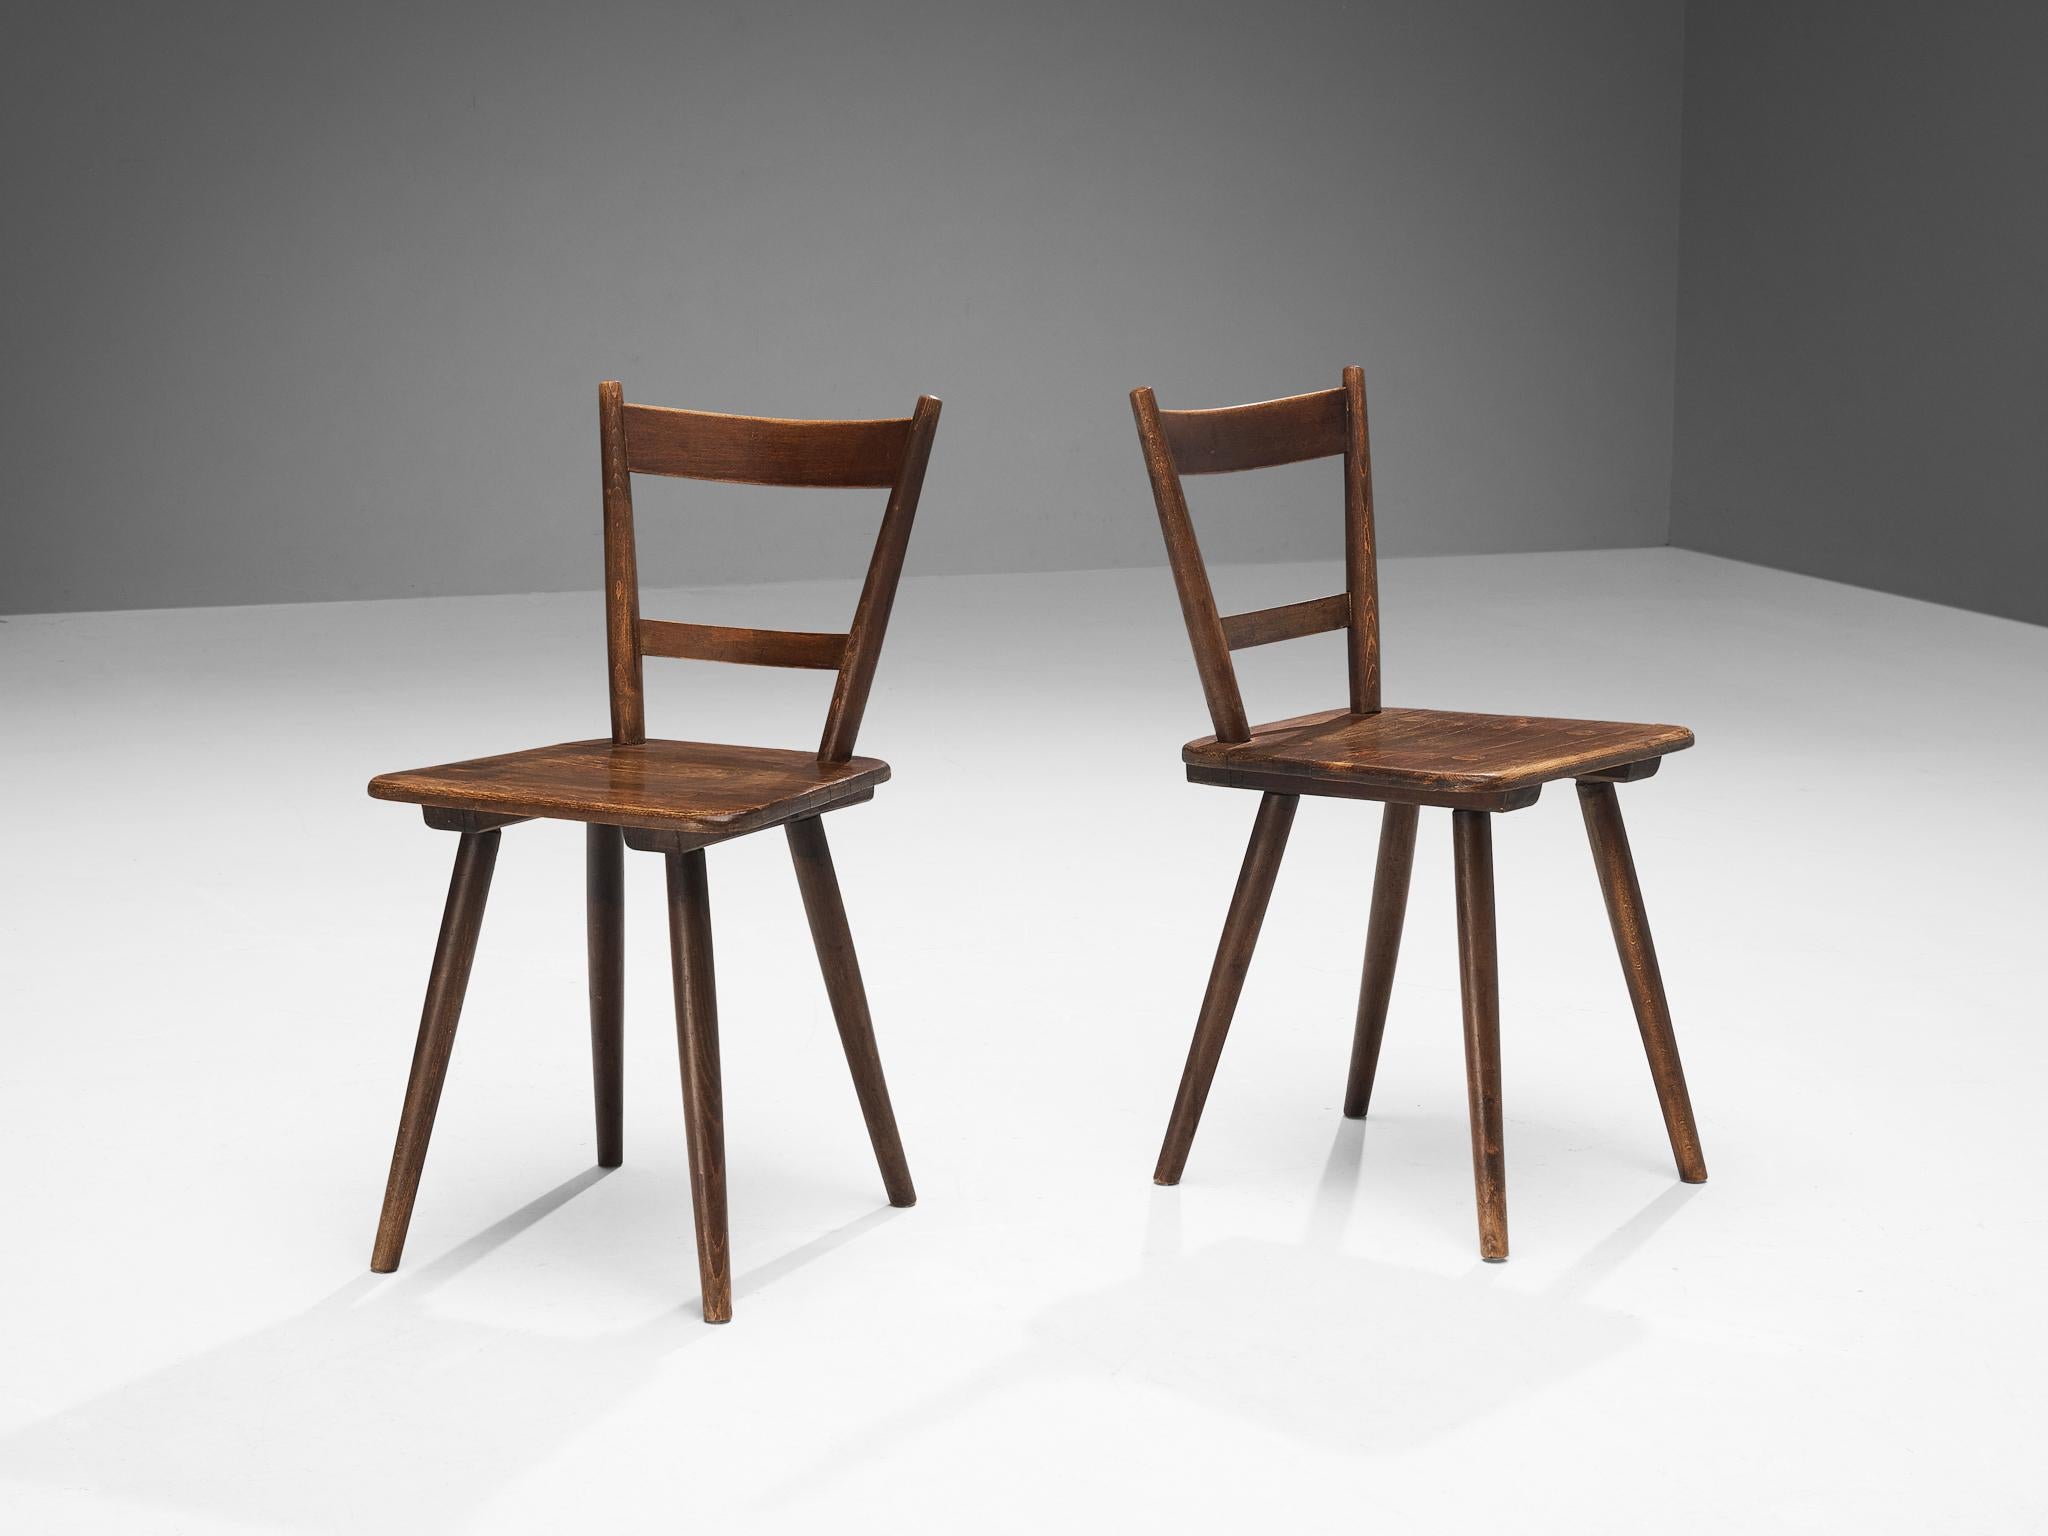 Pair of dining chairs, stained wood, France, late 1940s. 

Rustic pair of dining chairs manufactured in France. Simple yet stylish, these chairs feature a modest frame with sleek, elegant elements. Note for example the tapered legs slightly